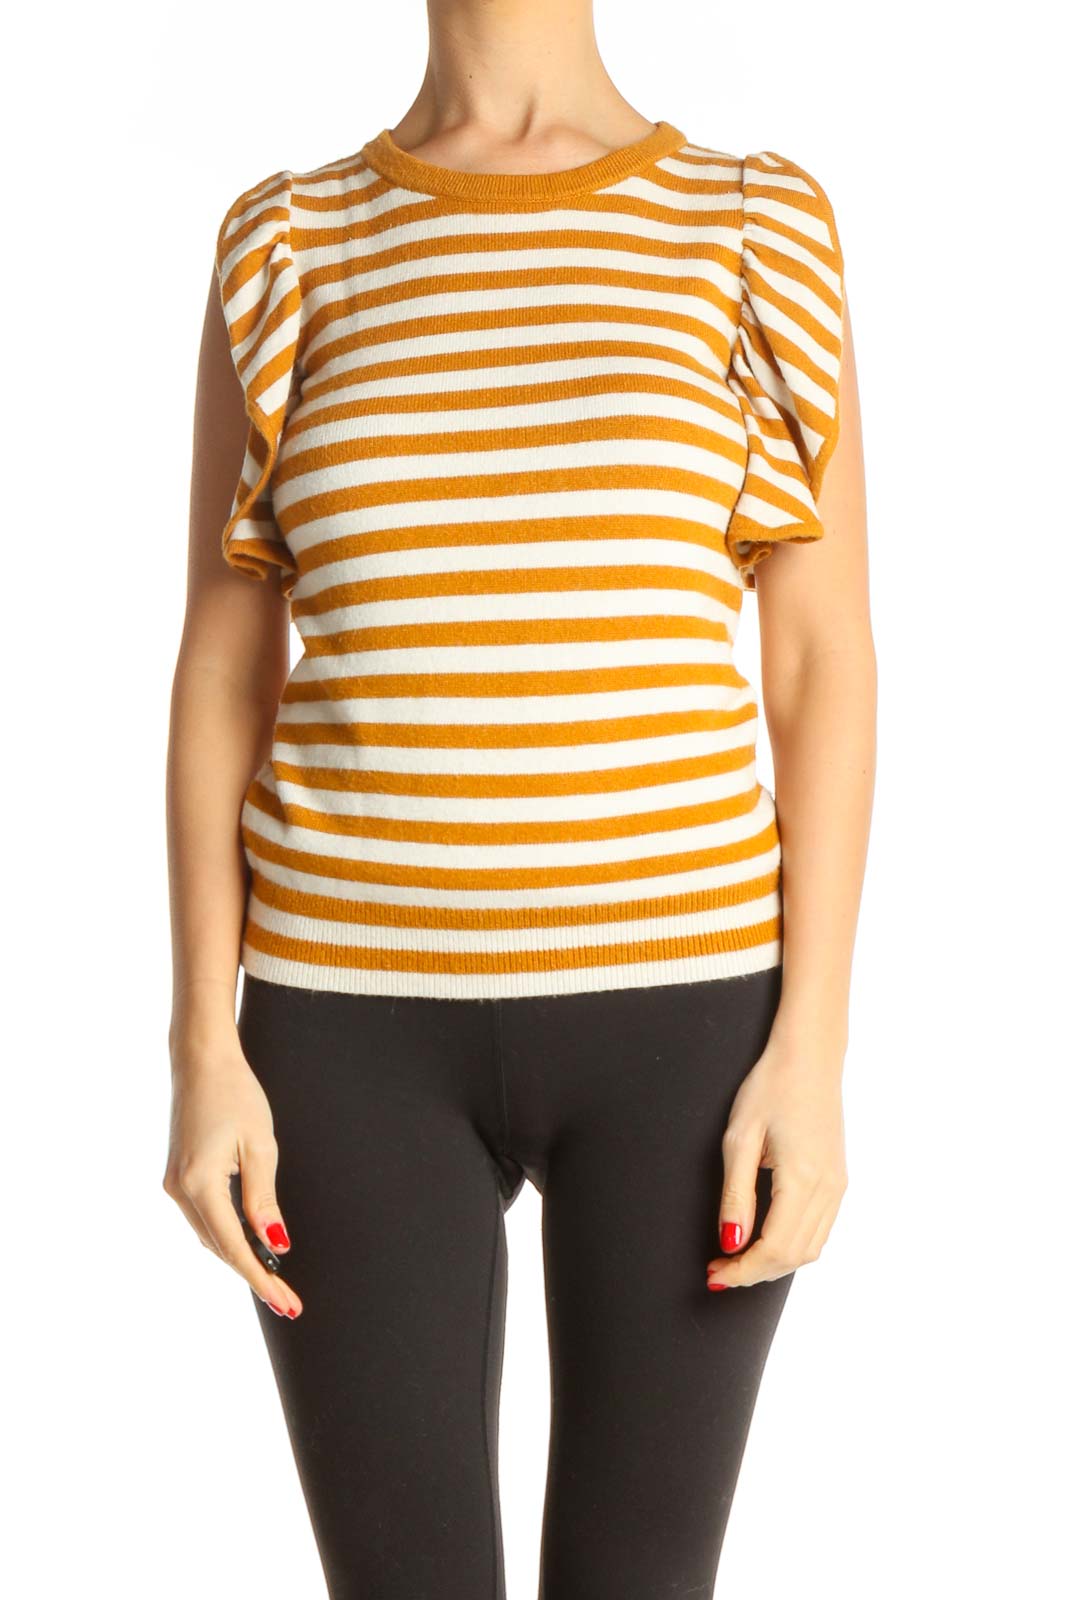 Orange Striped All Day Wear T-Shirt Front